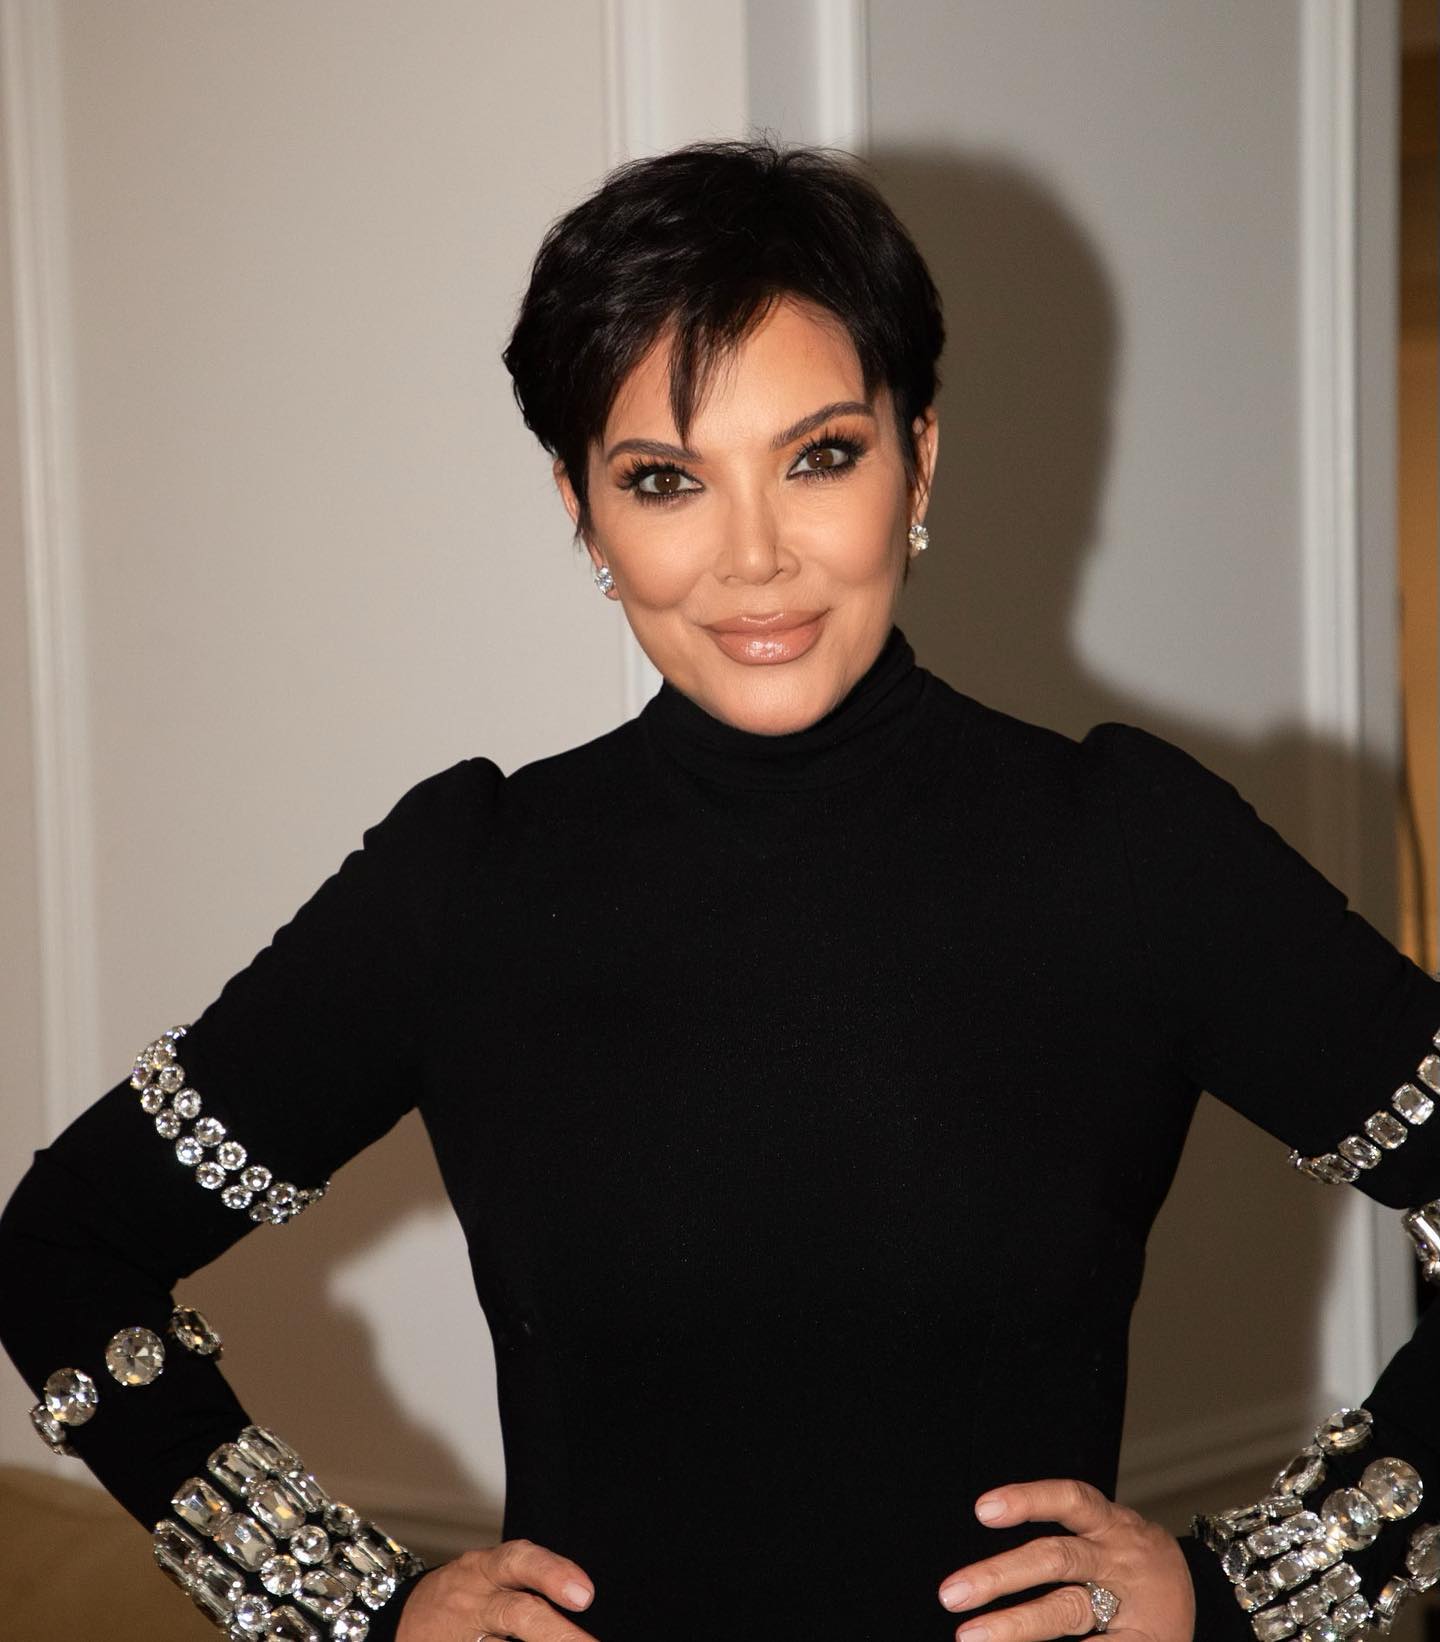 It's rare to catch the Kardashian matriarch without a full face of makeup and filters